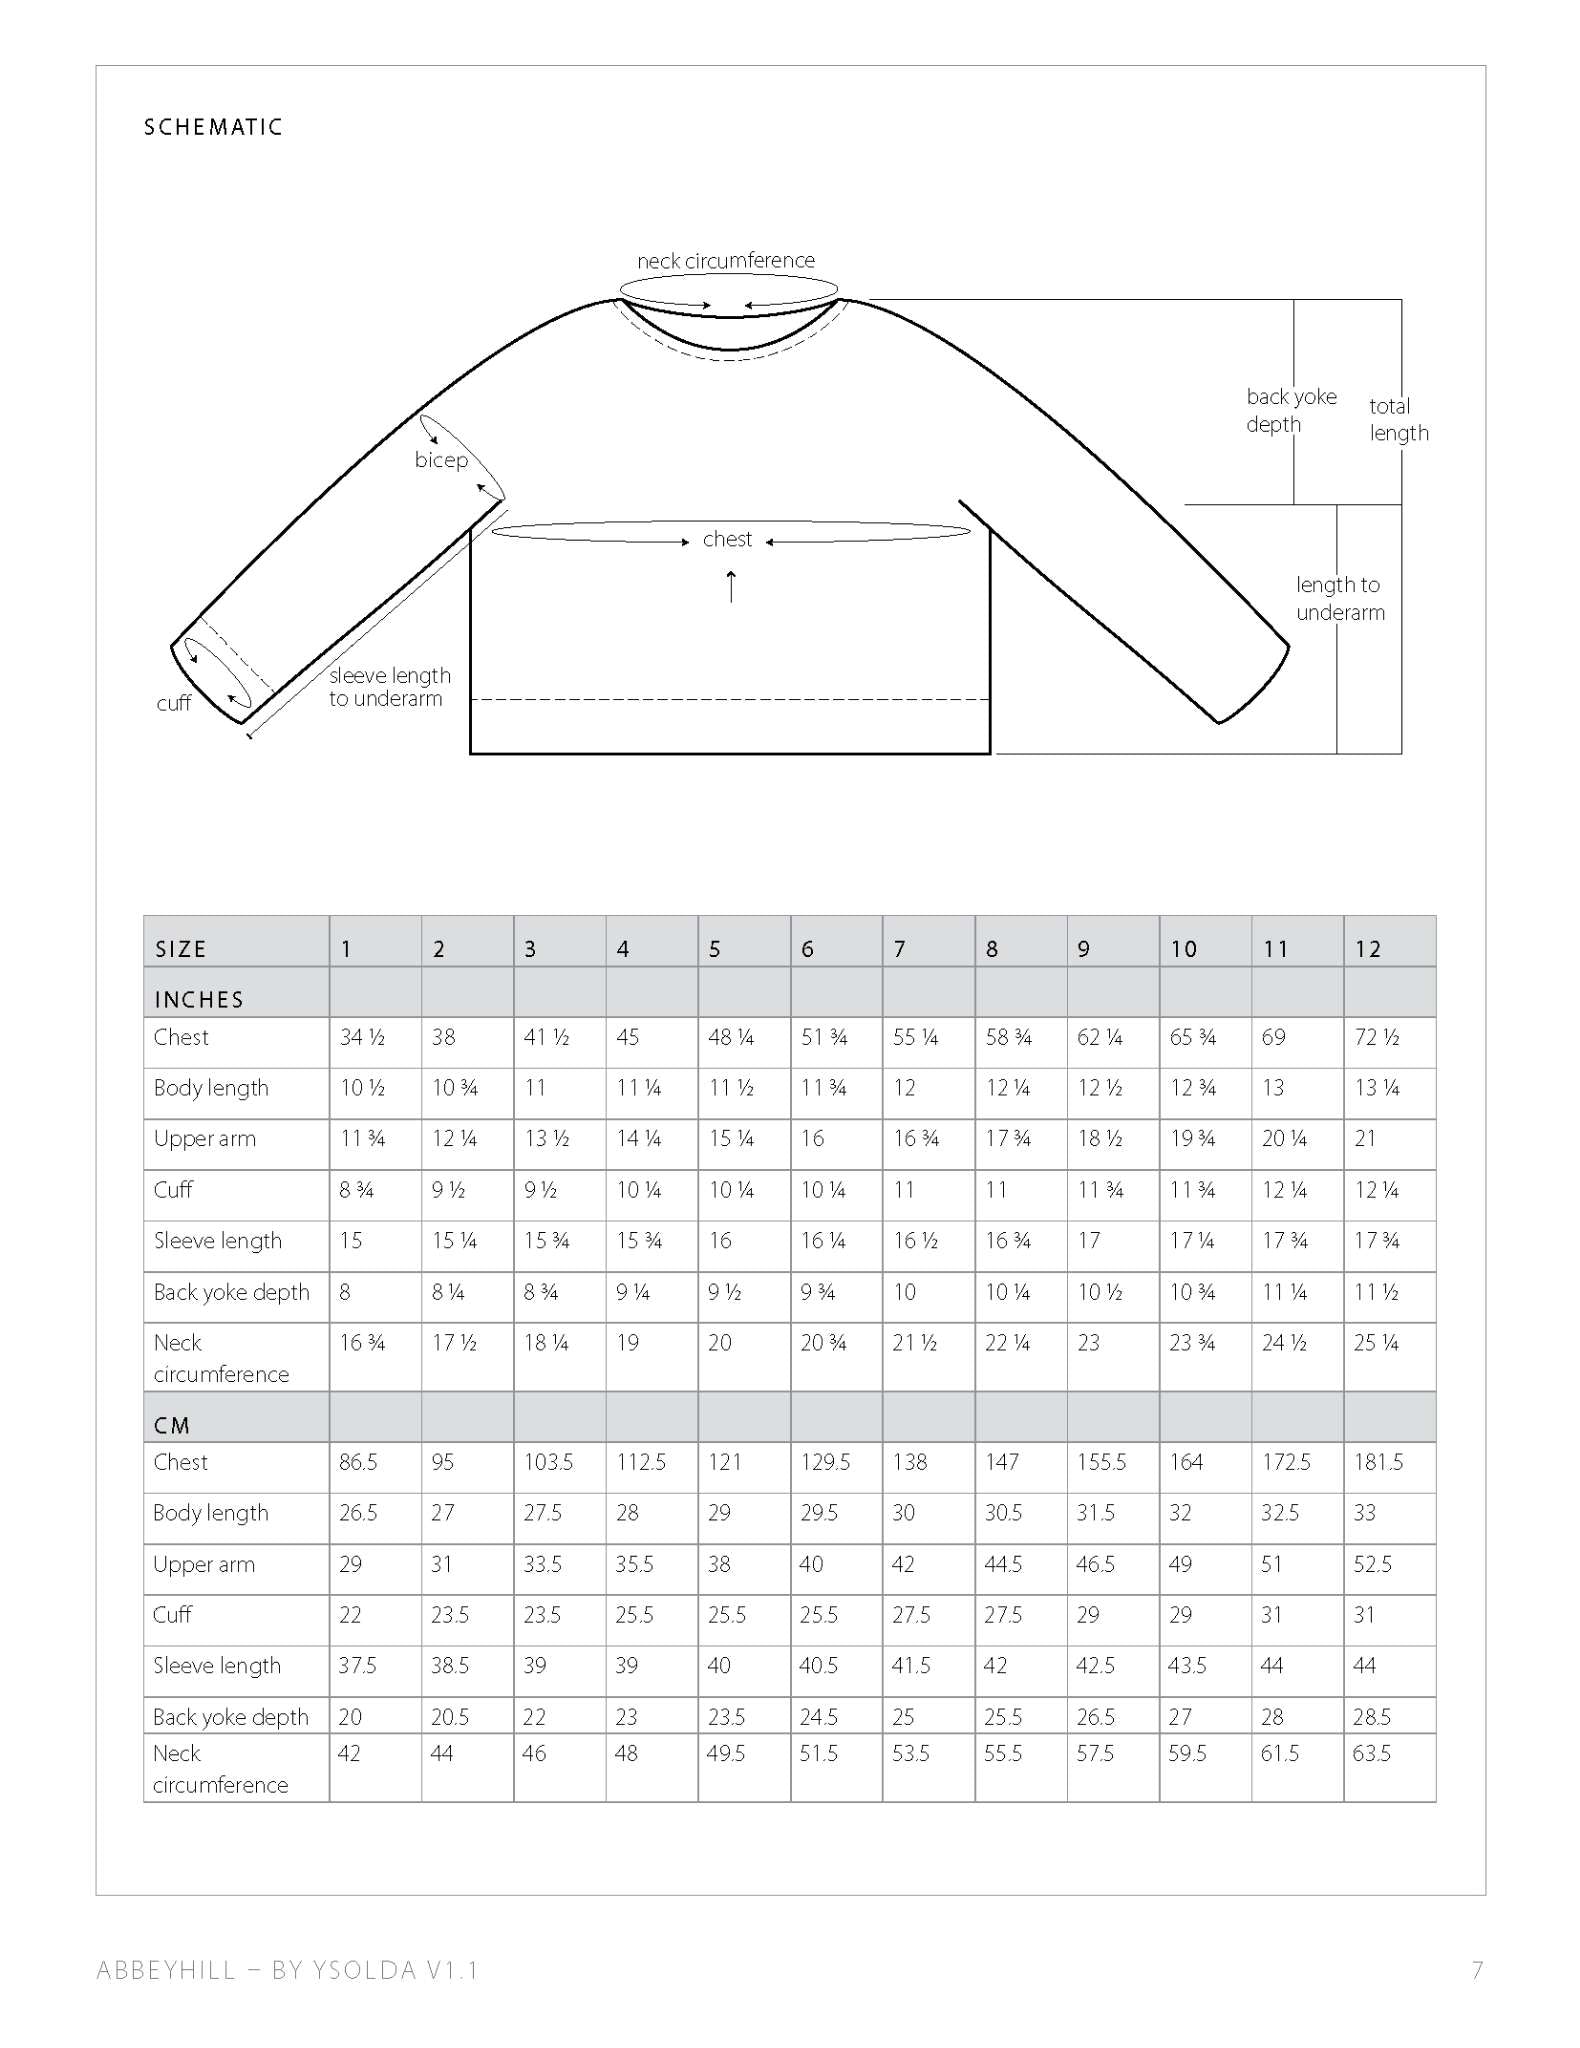 a screenshot of a sweater schematic, with arrows to show the measurement points taken, and a table of measurements for each size